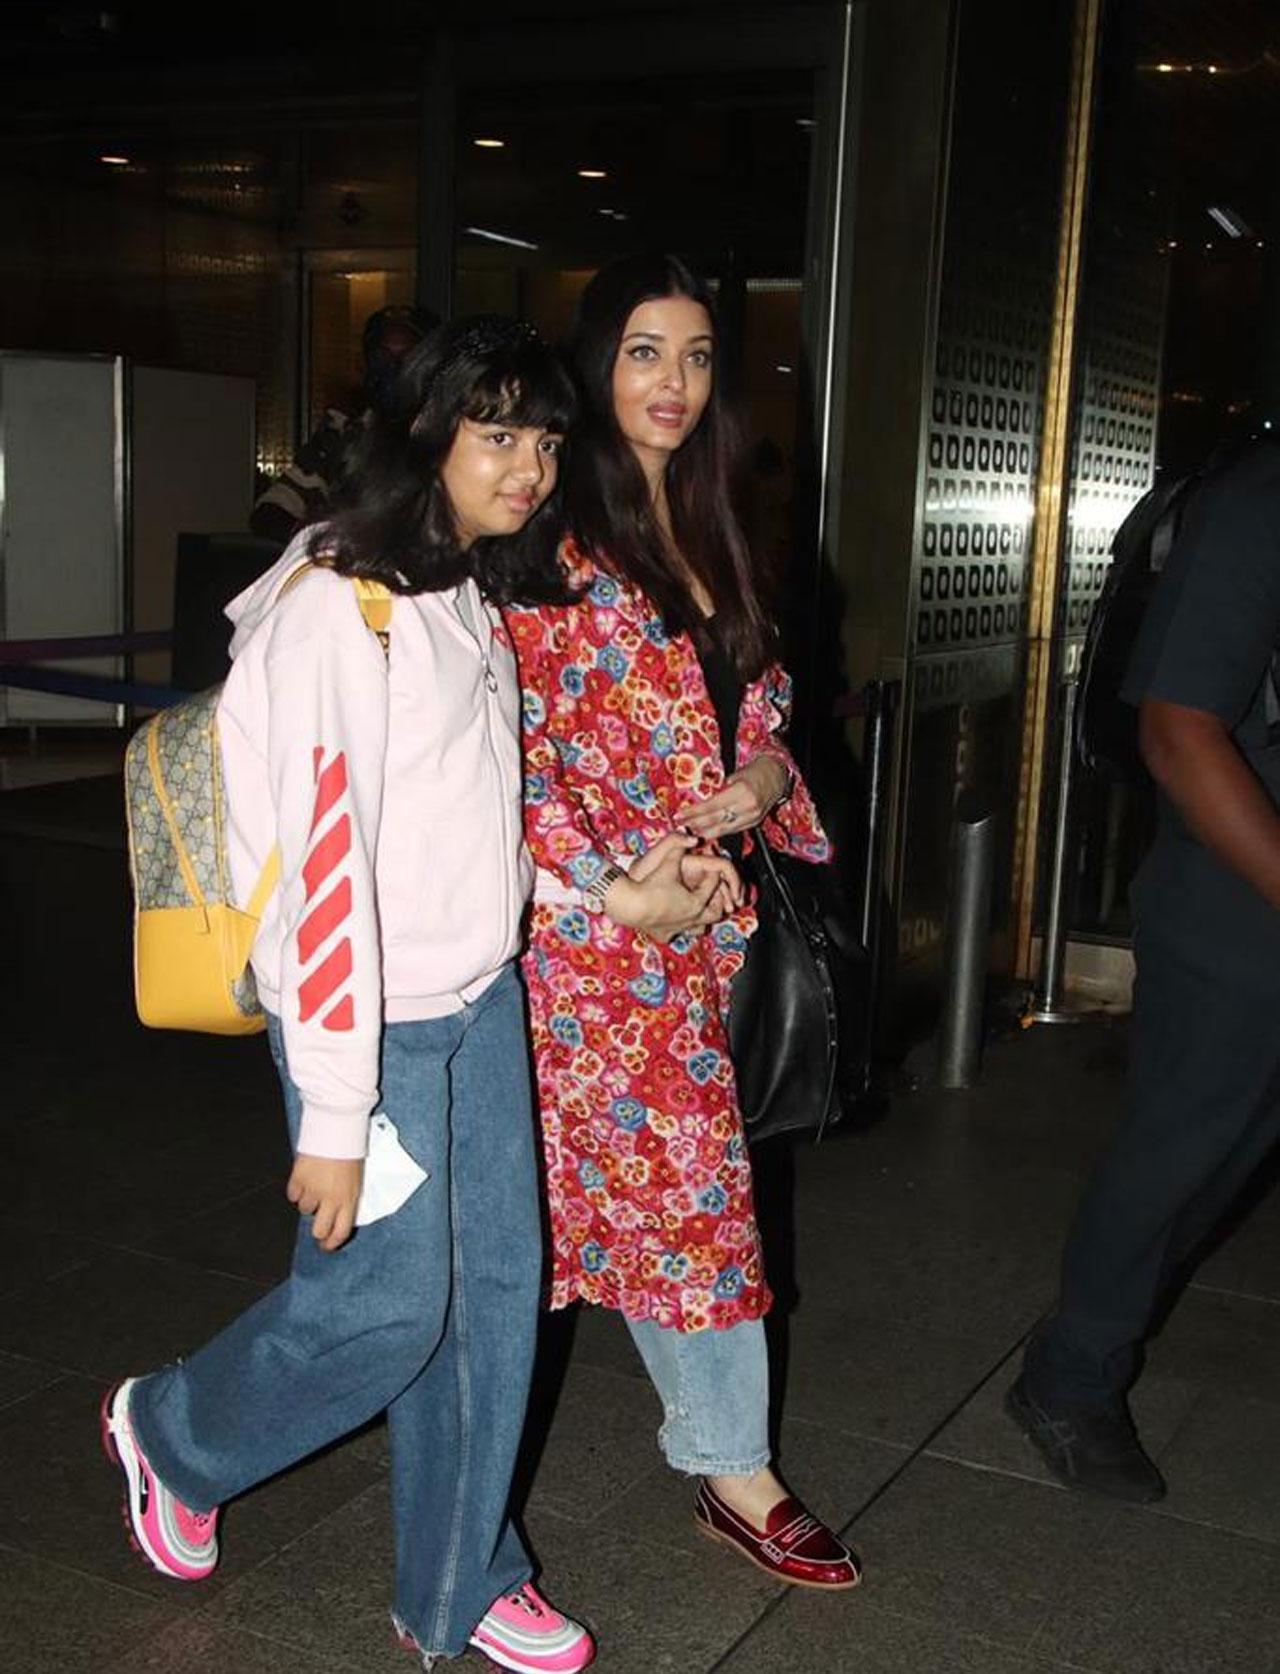 Aishwarya has been a regular attendee at the Cannes Film Festival for years now. Her husband Abhishek Bachchan and daughter Aaradhya were also at the French Riviera.